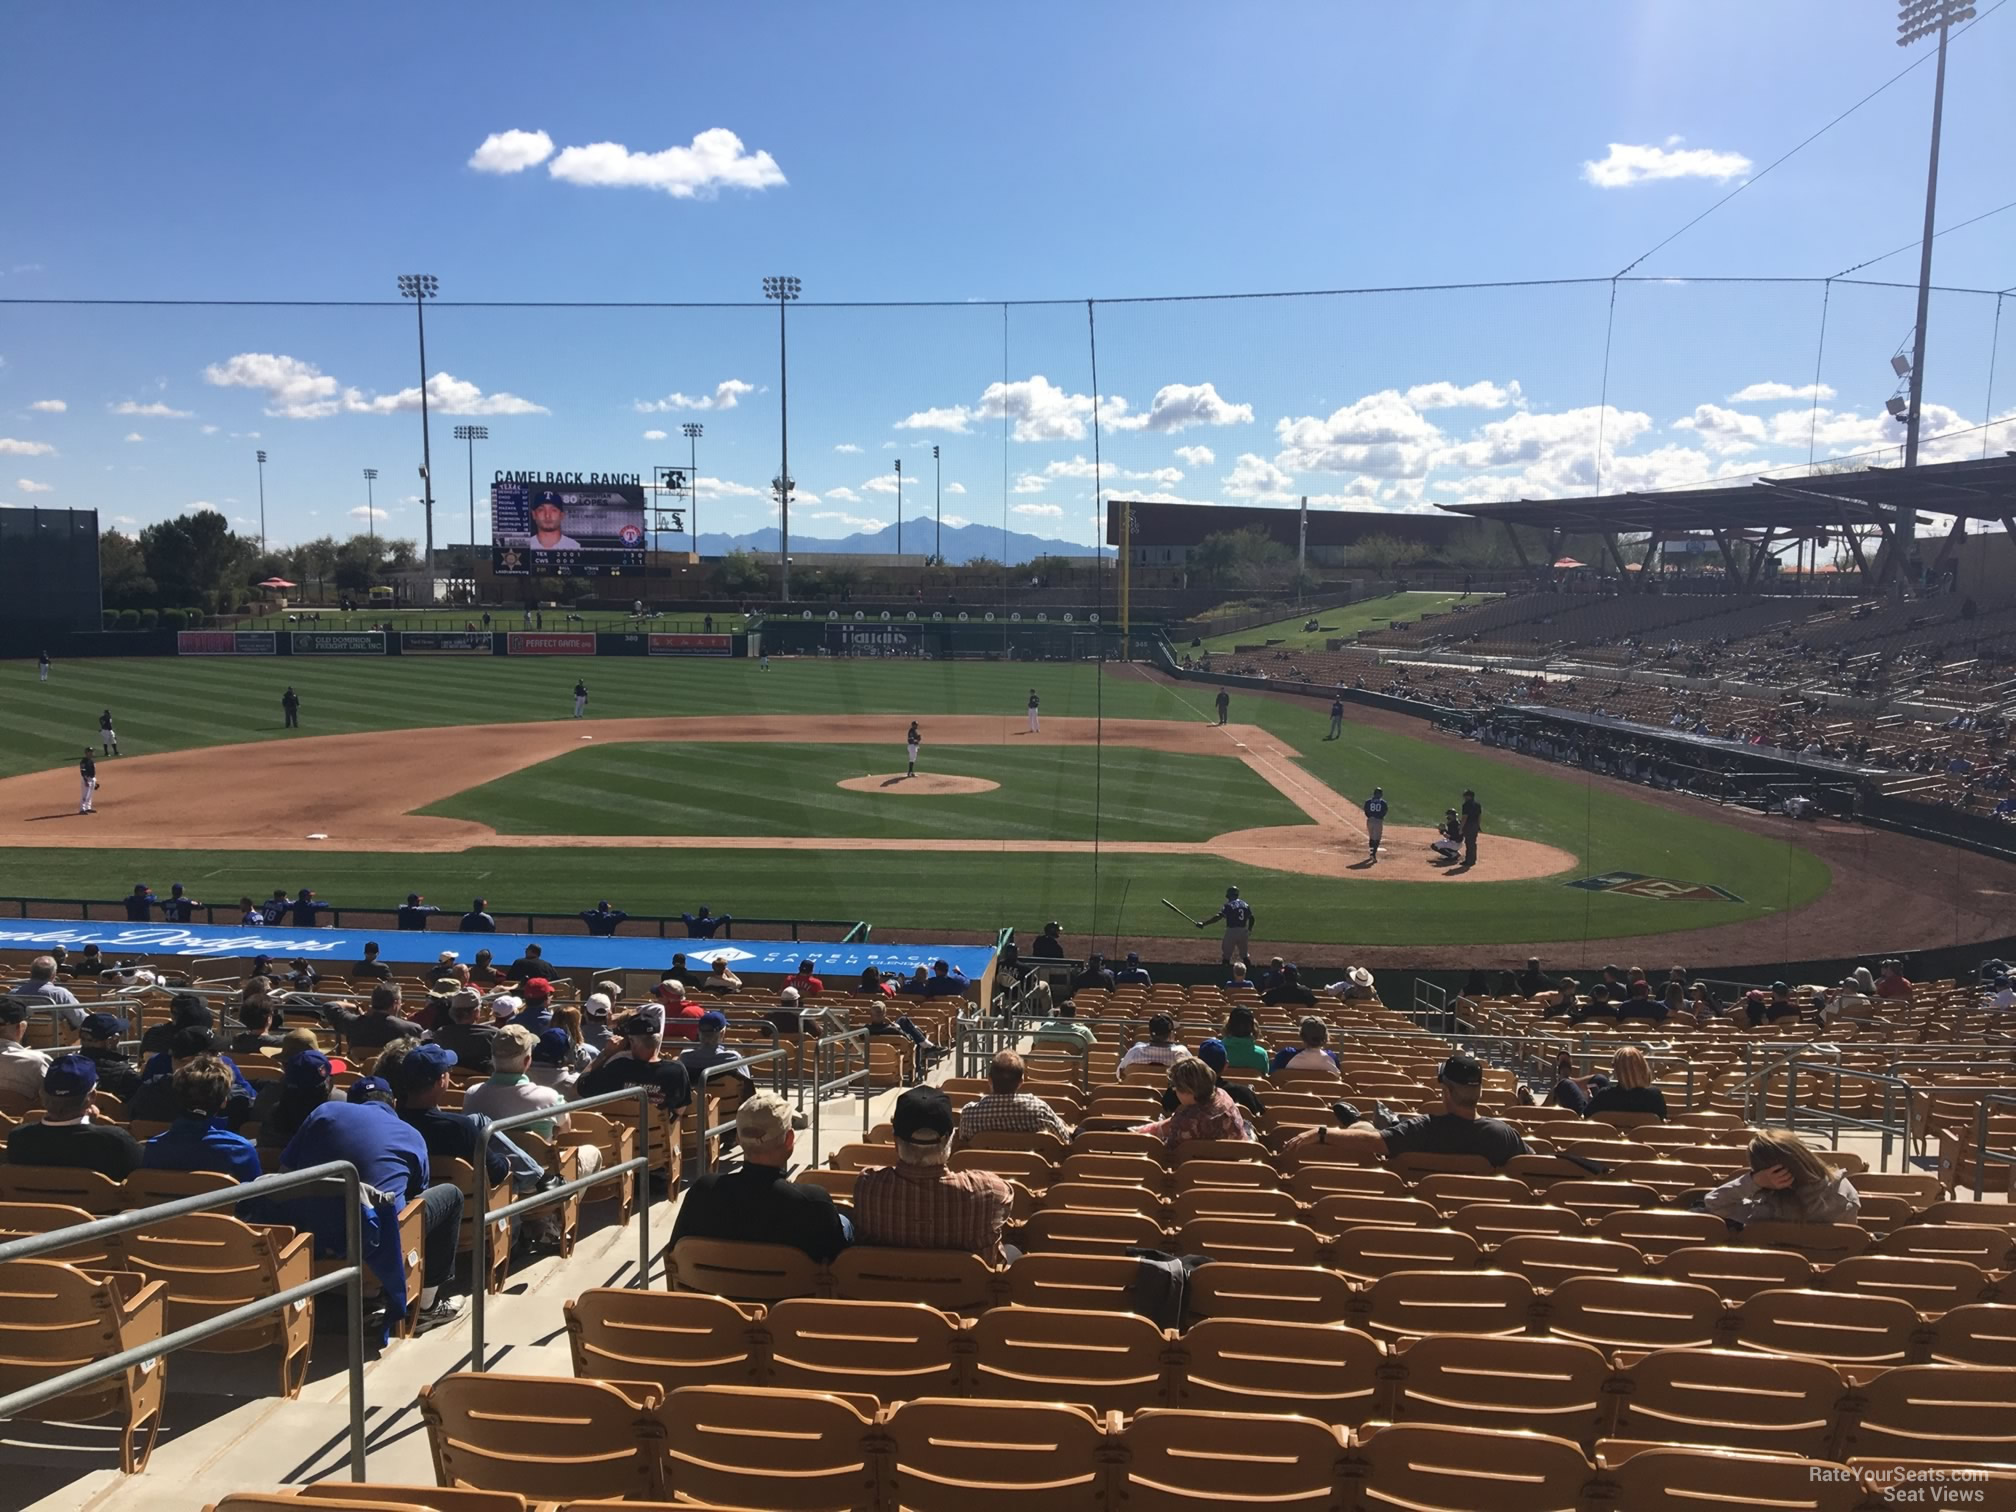 section 119, row 18 seat view  - camelback ranch